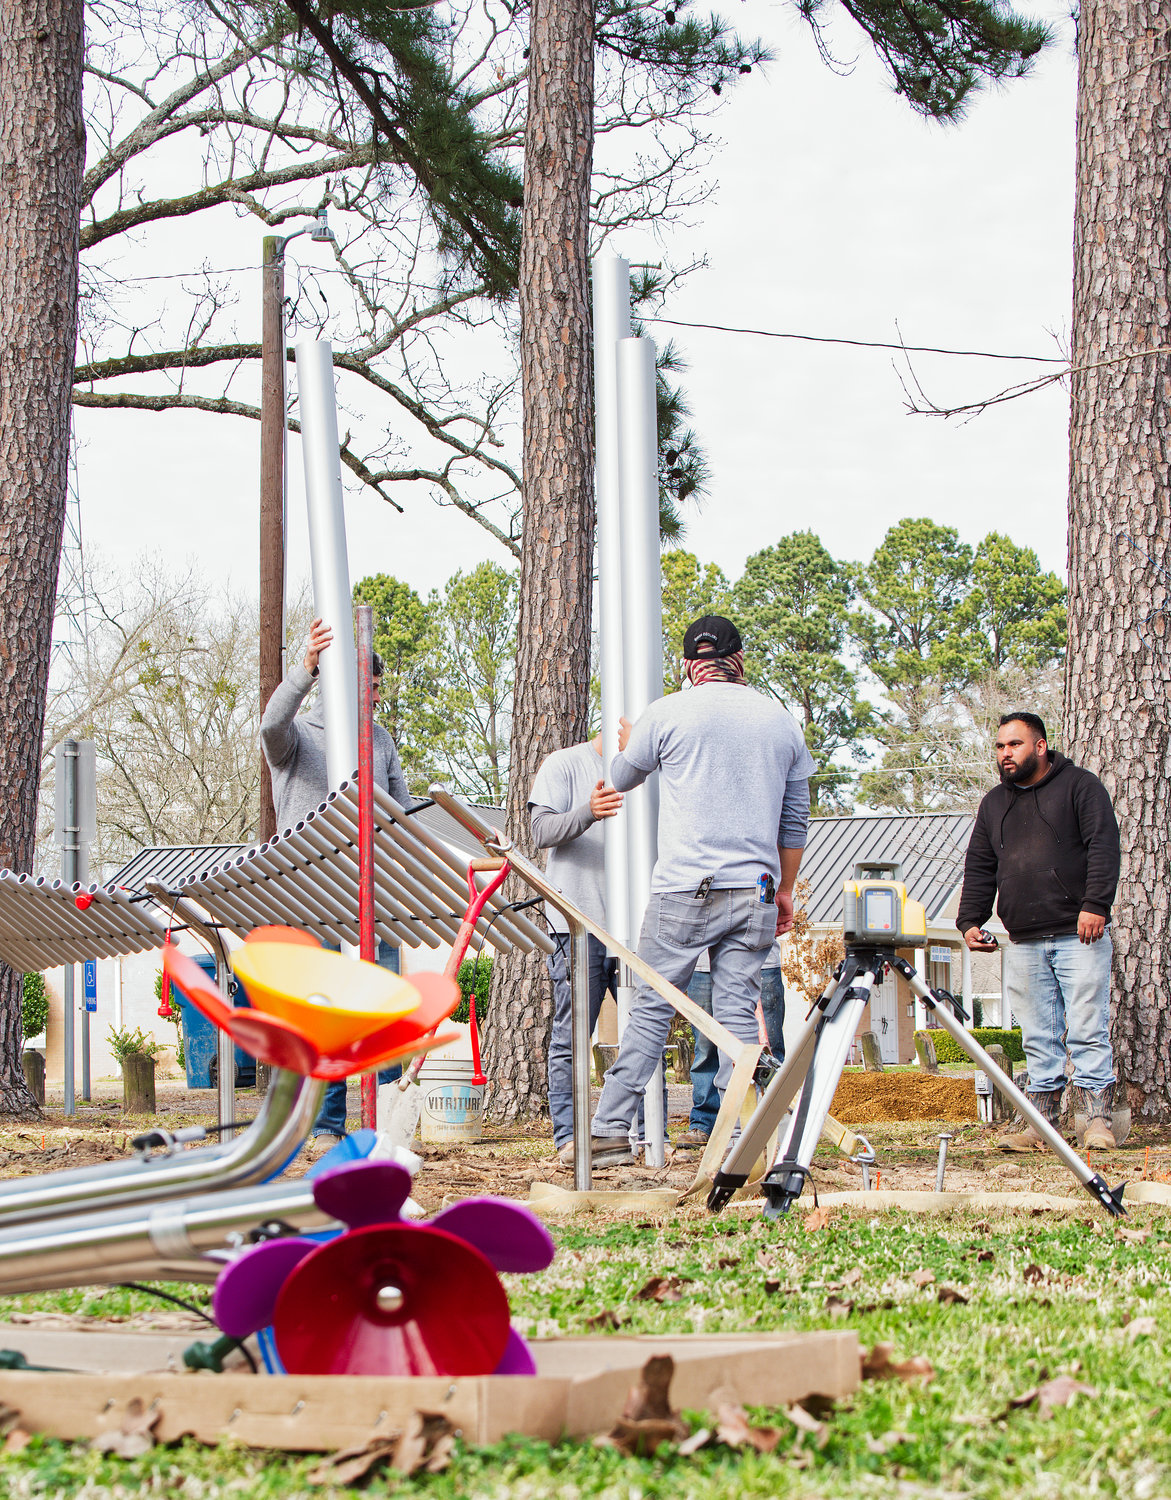 The musical instruments recently installed at Jim Hogg City Park in Quitman by the Pilot Club are among the projects assisted by the Operation Roundup.